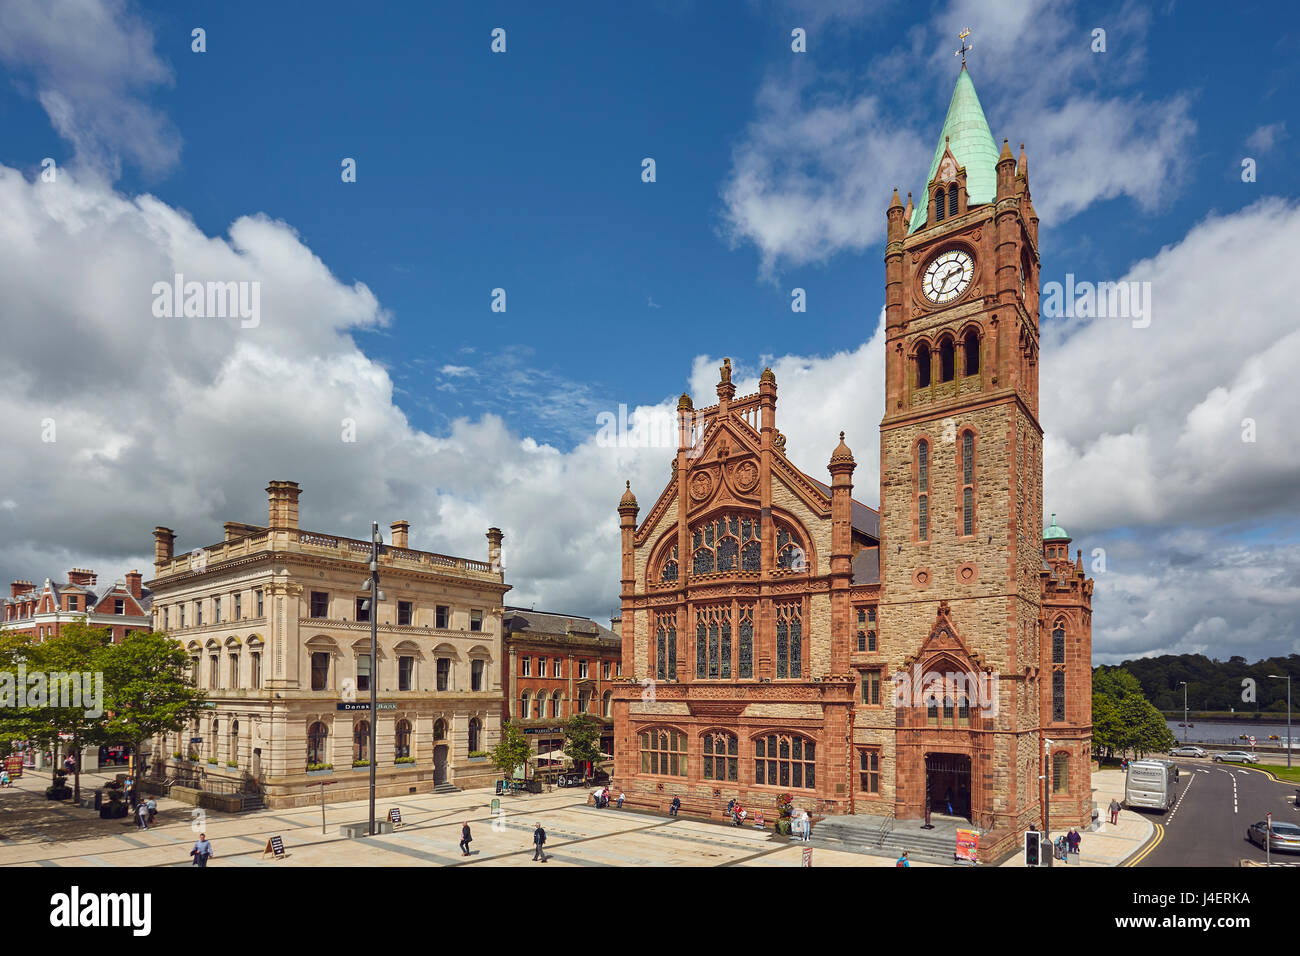 The Guildhall, Derry (Londonderry), County Londonderry, Ulster, Northern Ireland, United Kingdom, Europe Stock Photo